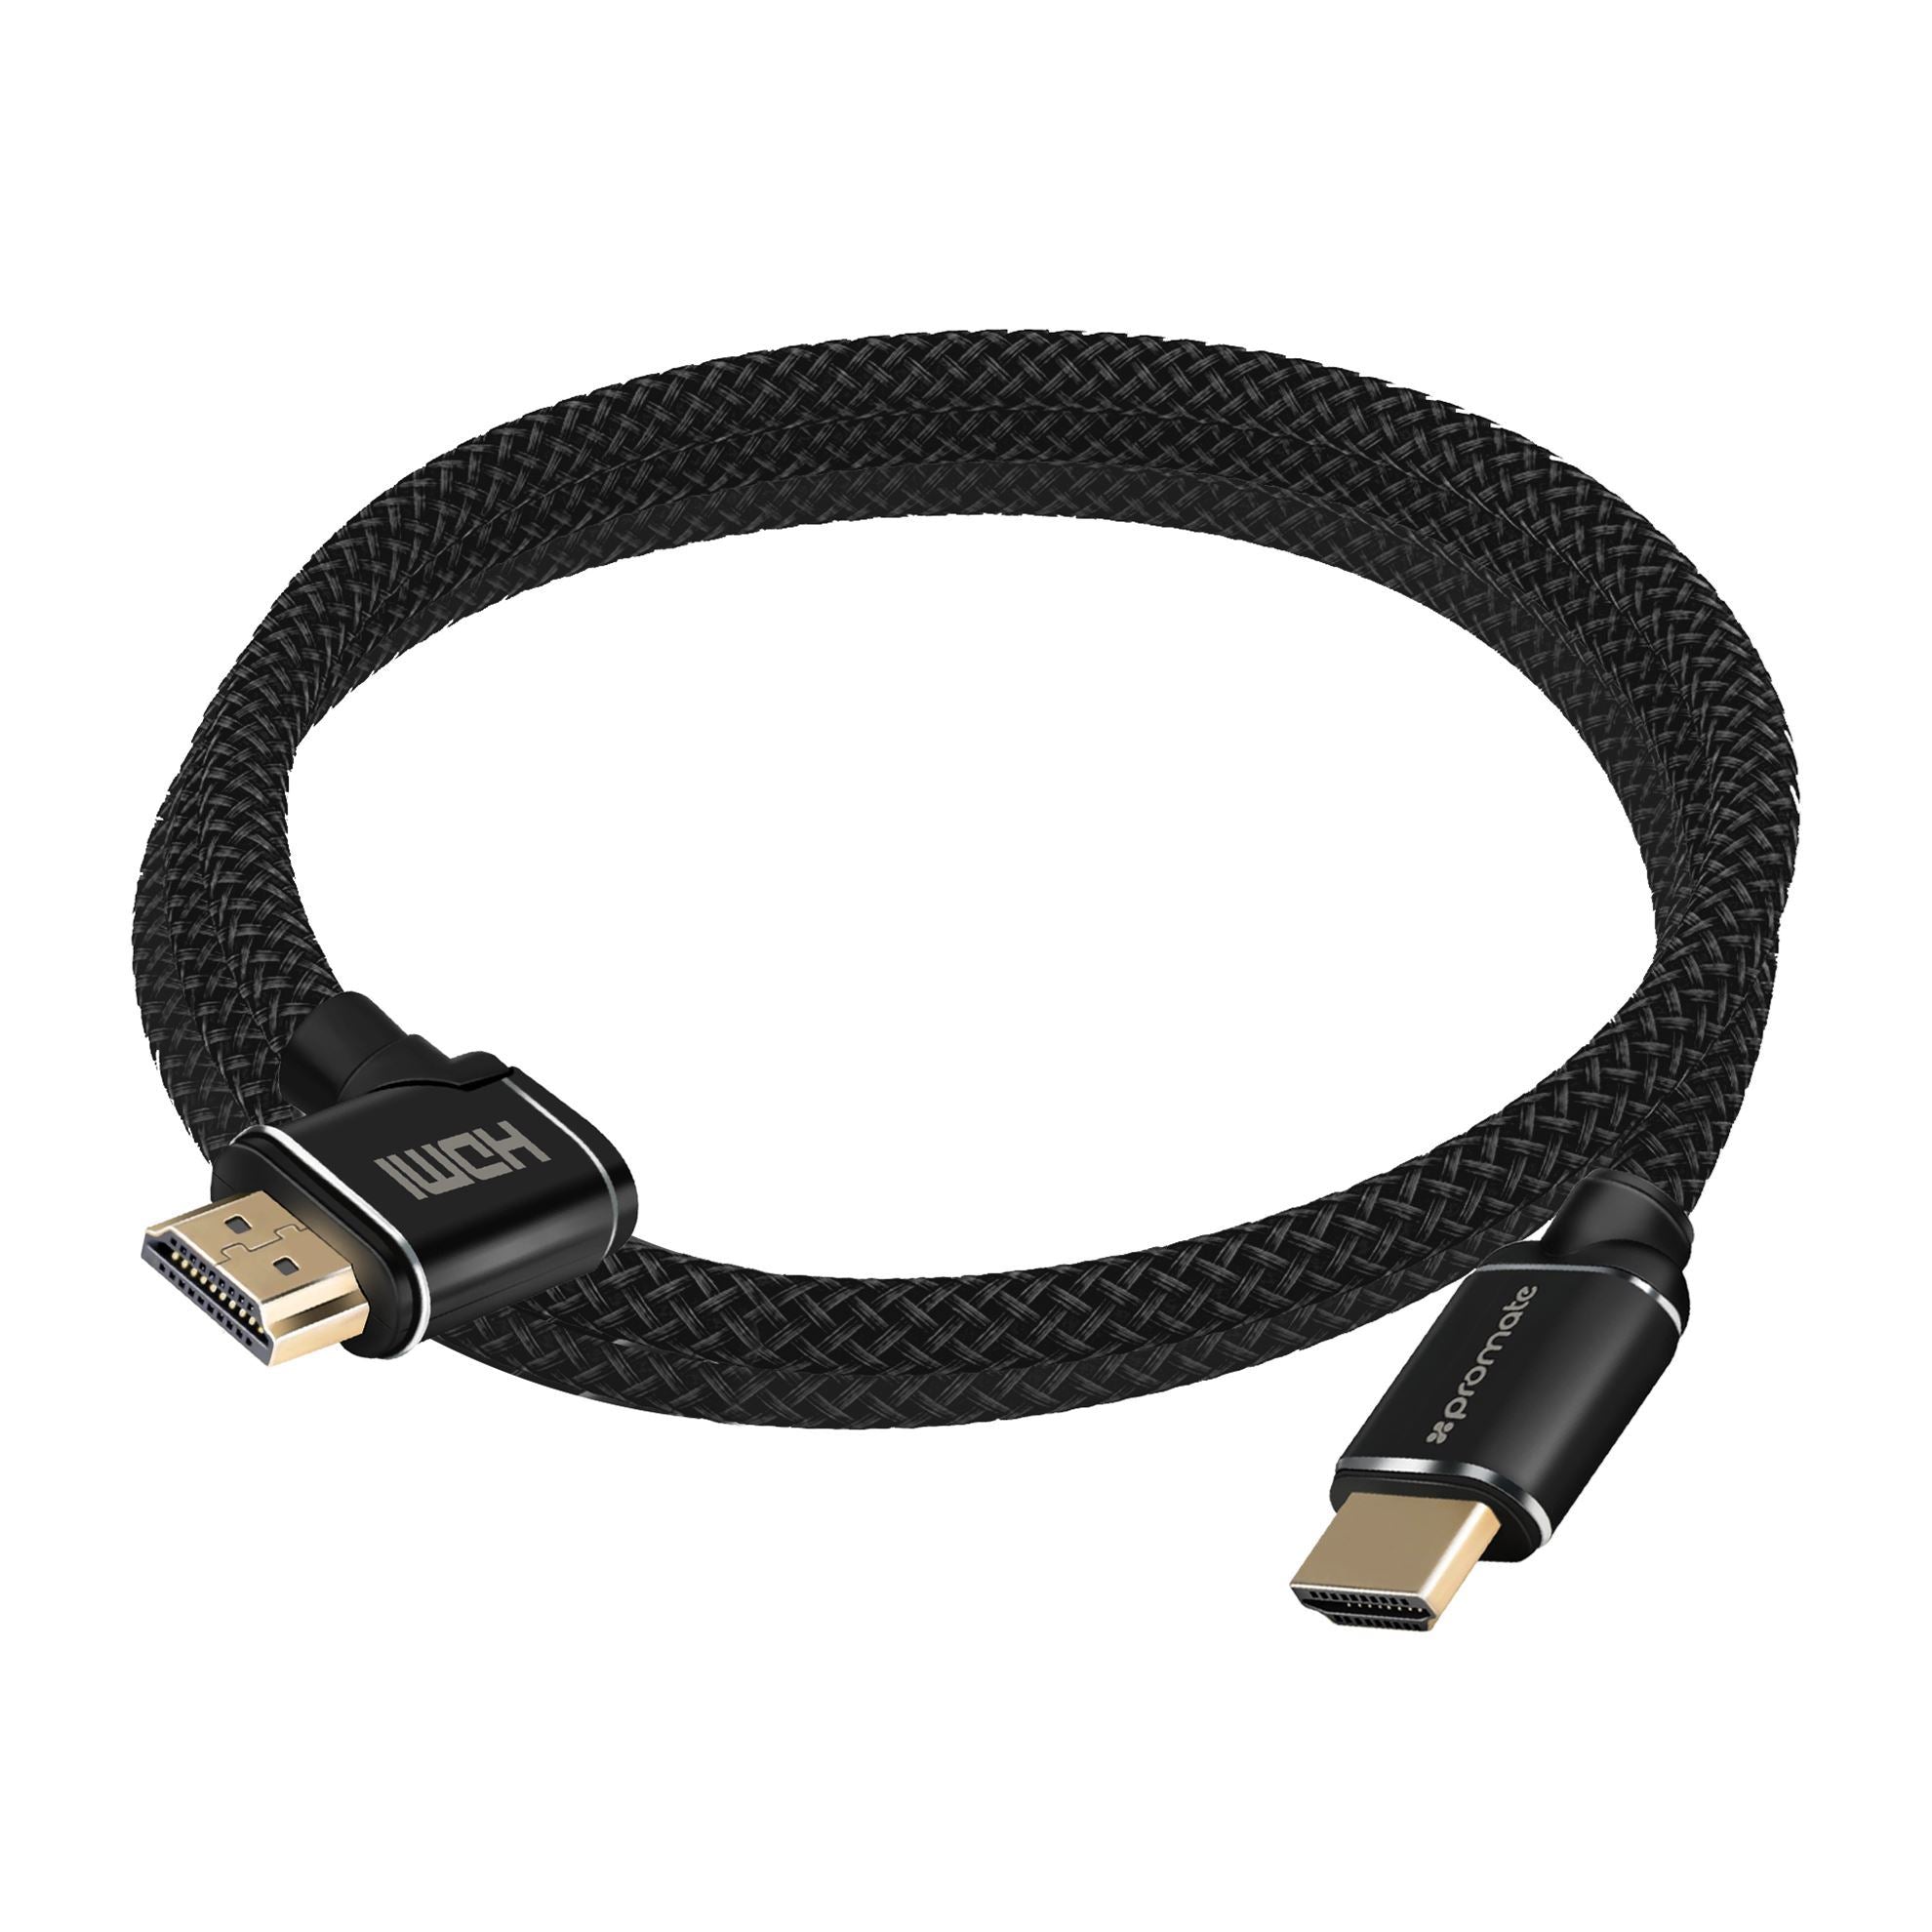 PROMATE_5m_4K_HDMI_right_angle_Cable._24K_Gold_plated._High-speed_Ethernet._3D_support._Mesh_braided_cable._Long_bend_lifespan._Max_Res:_4K@60Hz_(4096X2160)._Colour_black. 1686